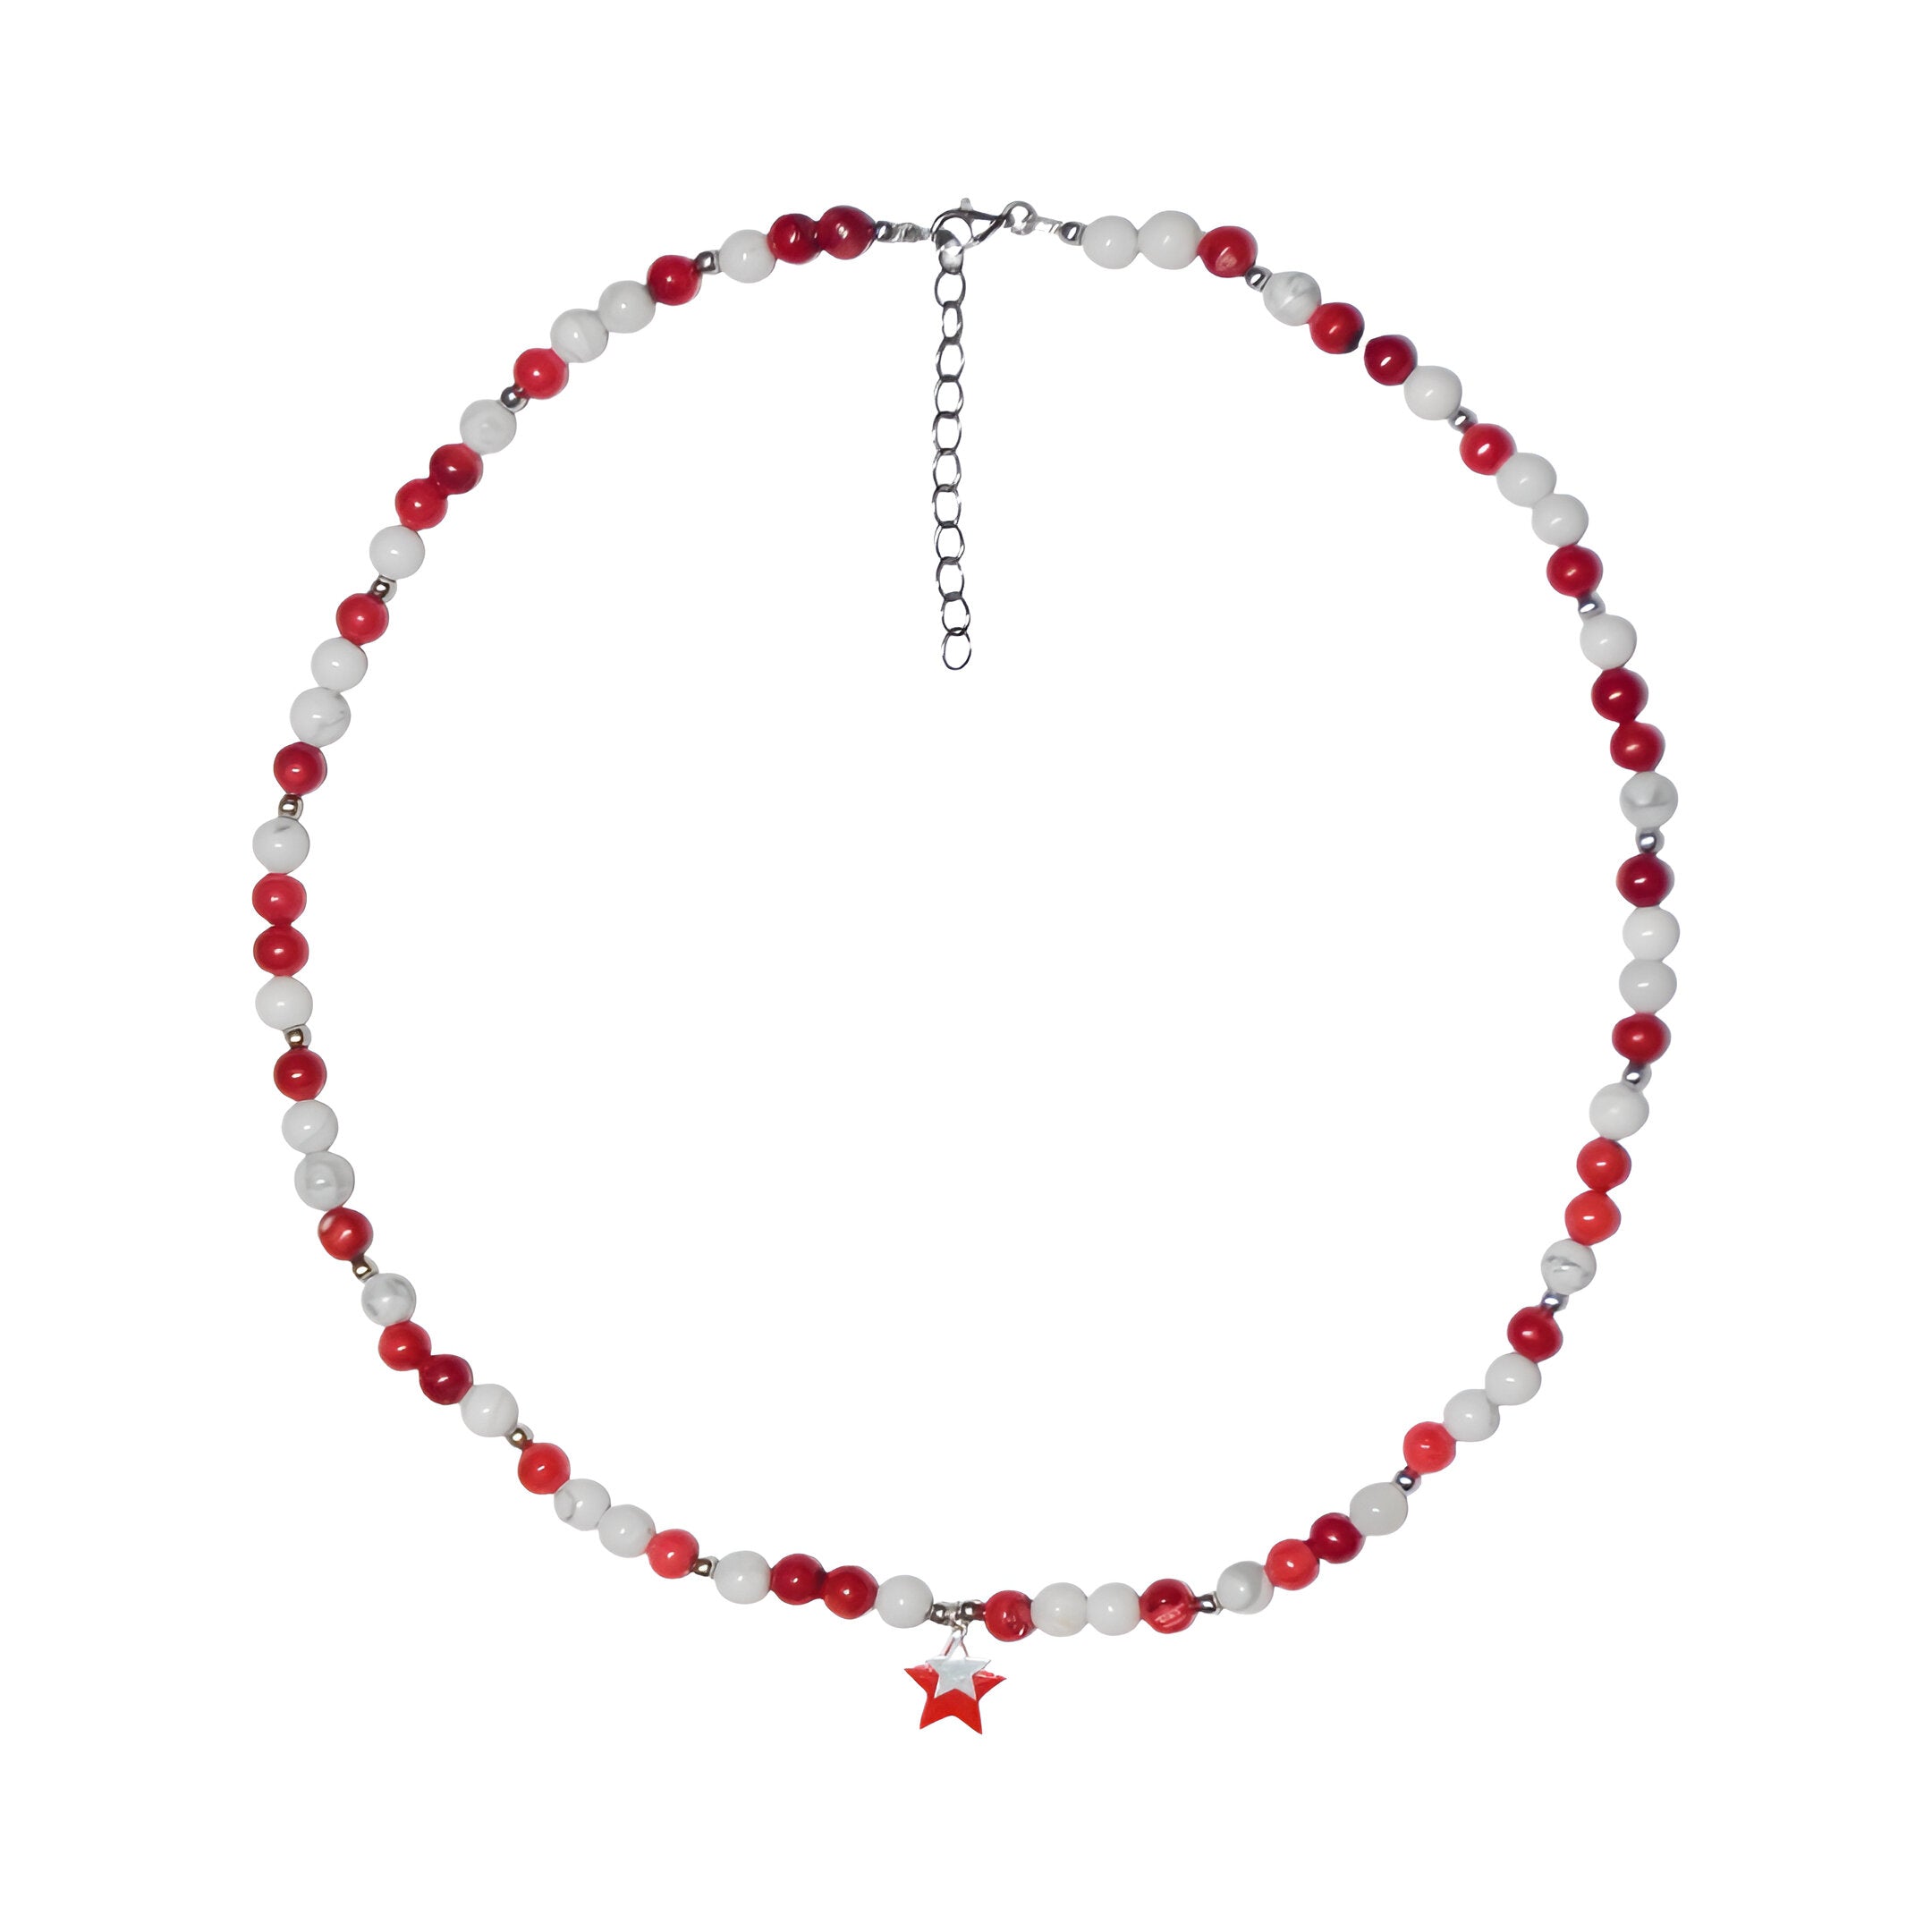 MELTED STAR NECKLACE